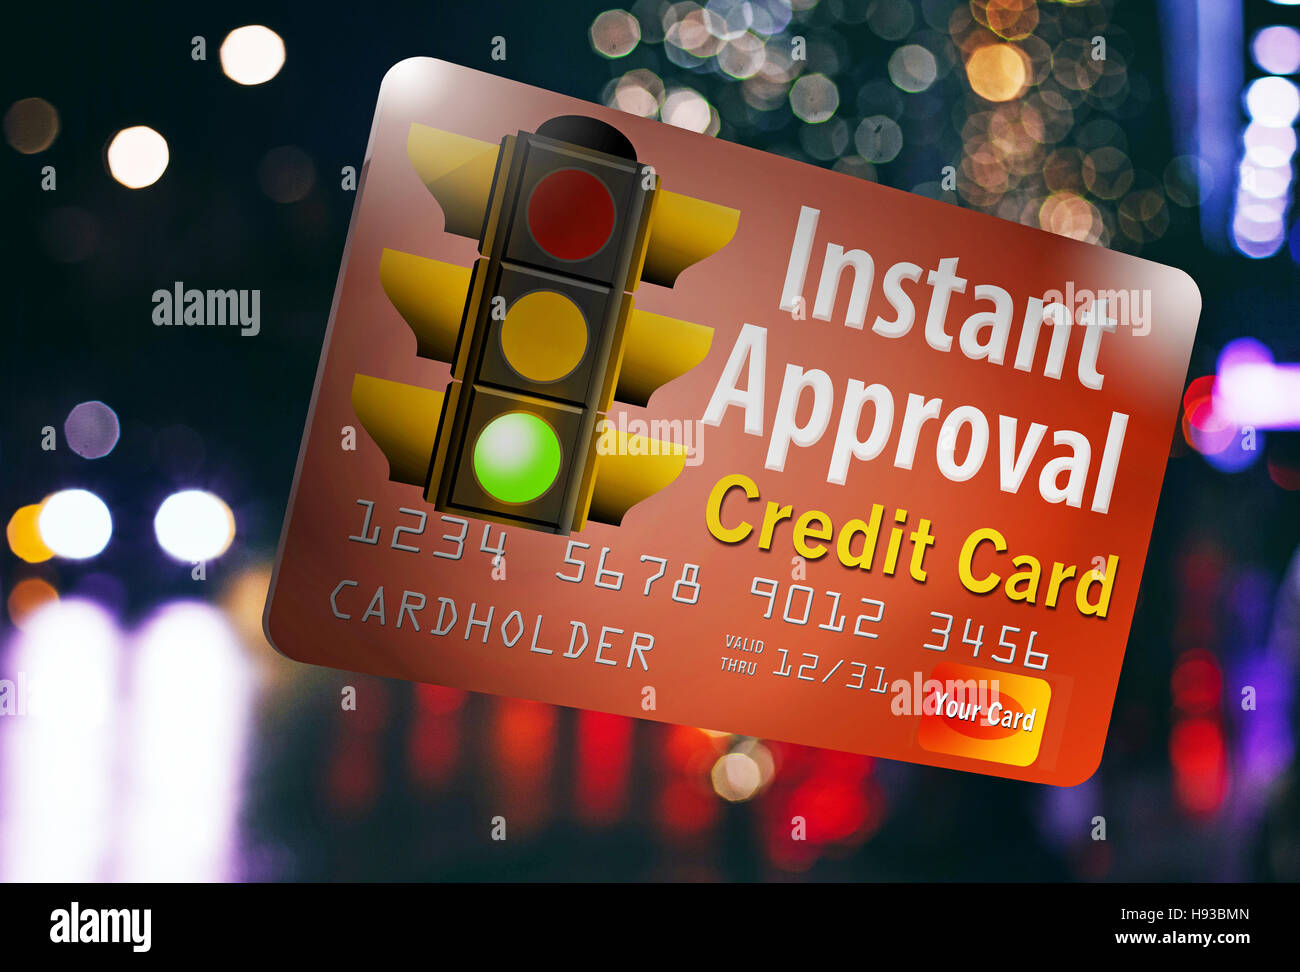 Instant Approval Credit Card With A Green Light For Being Approved Quickly Traffic Light With Traffic At Night Stock Photo Alamy